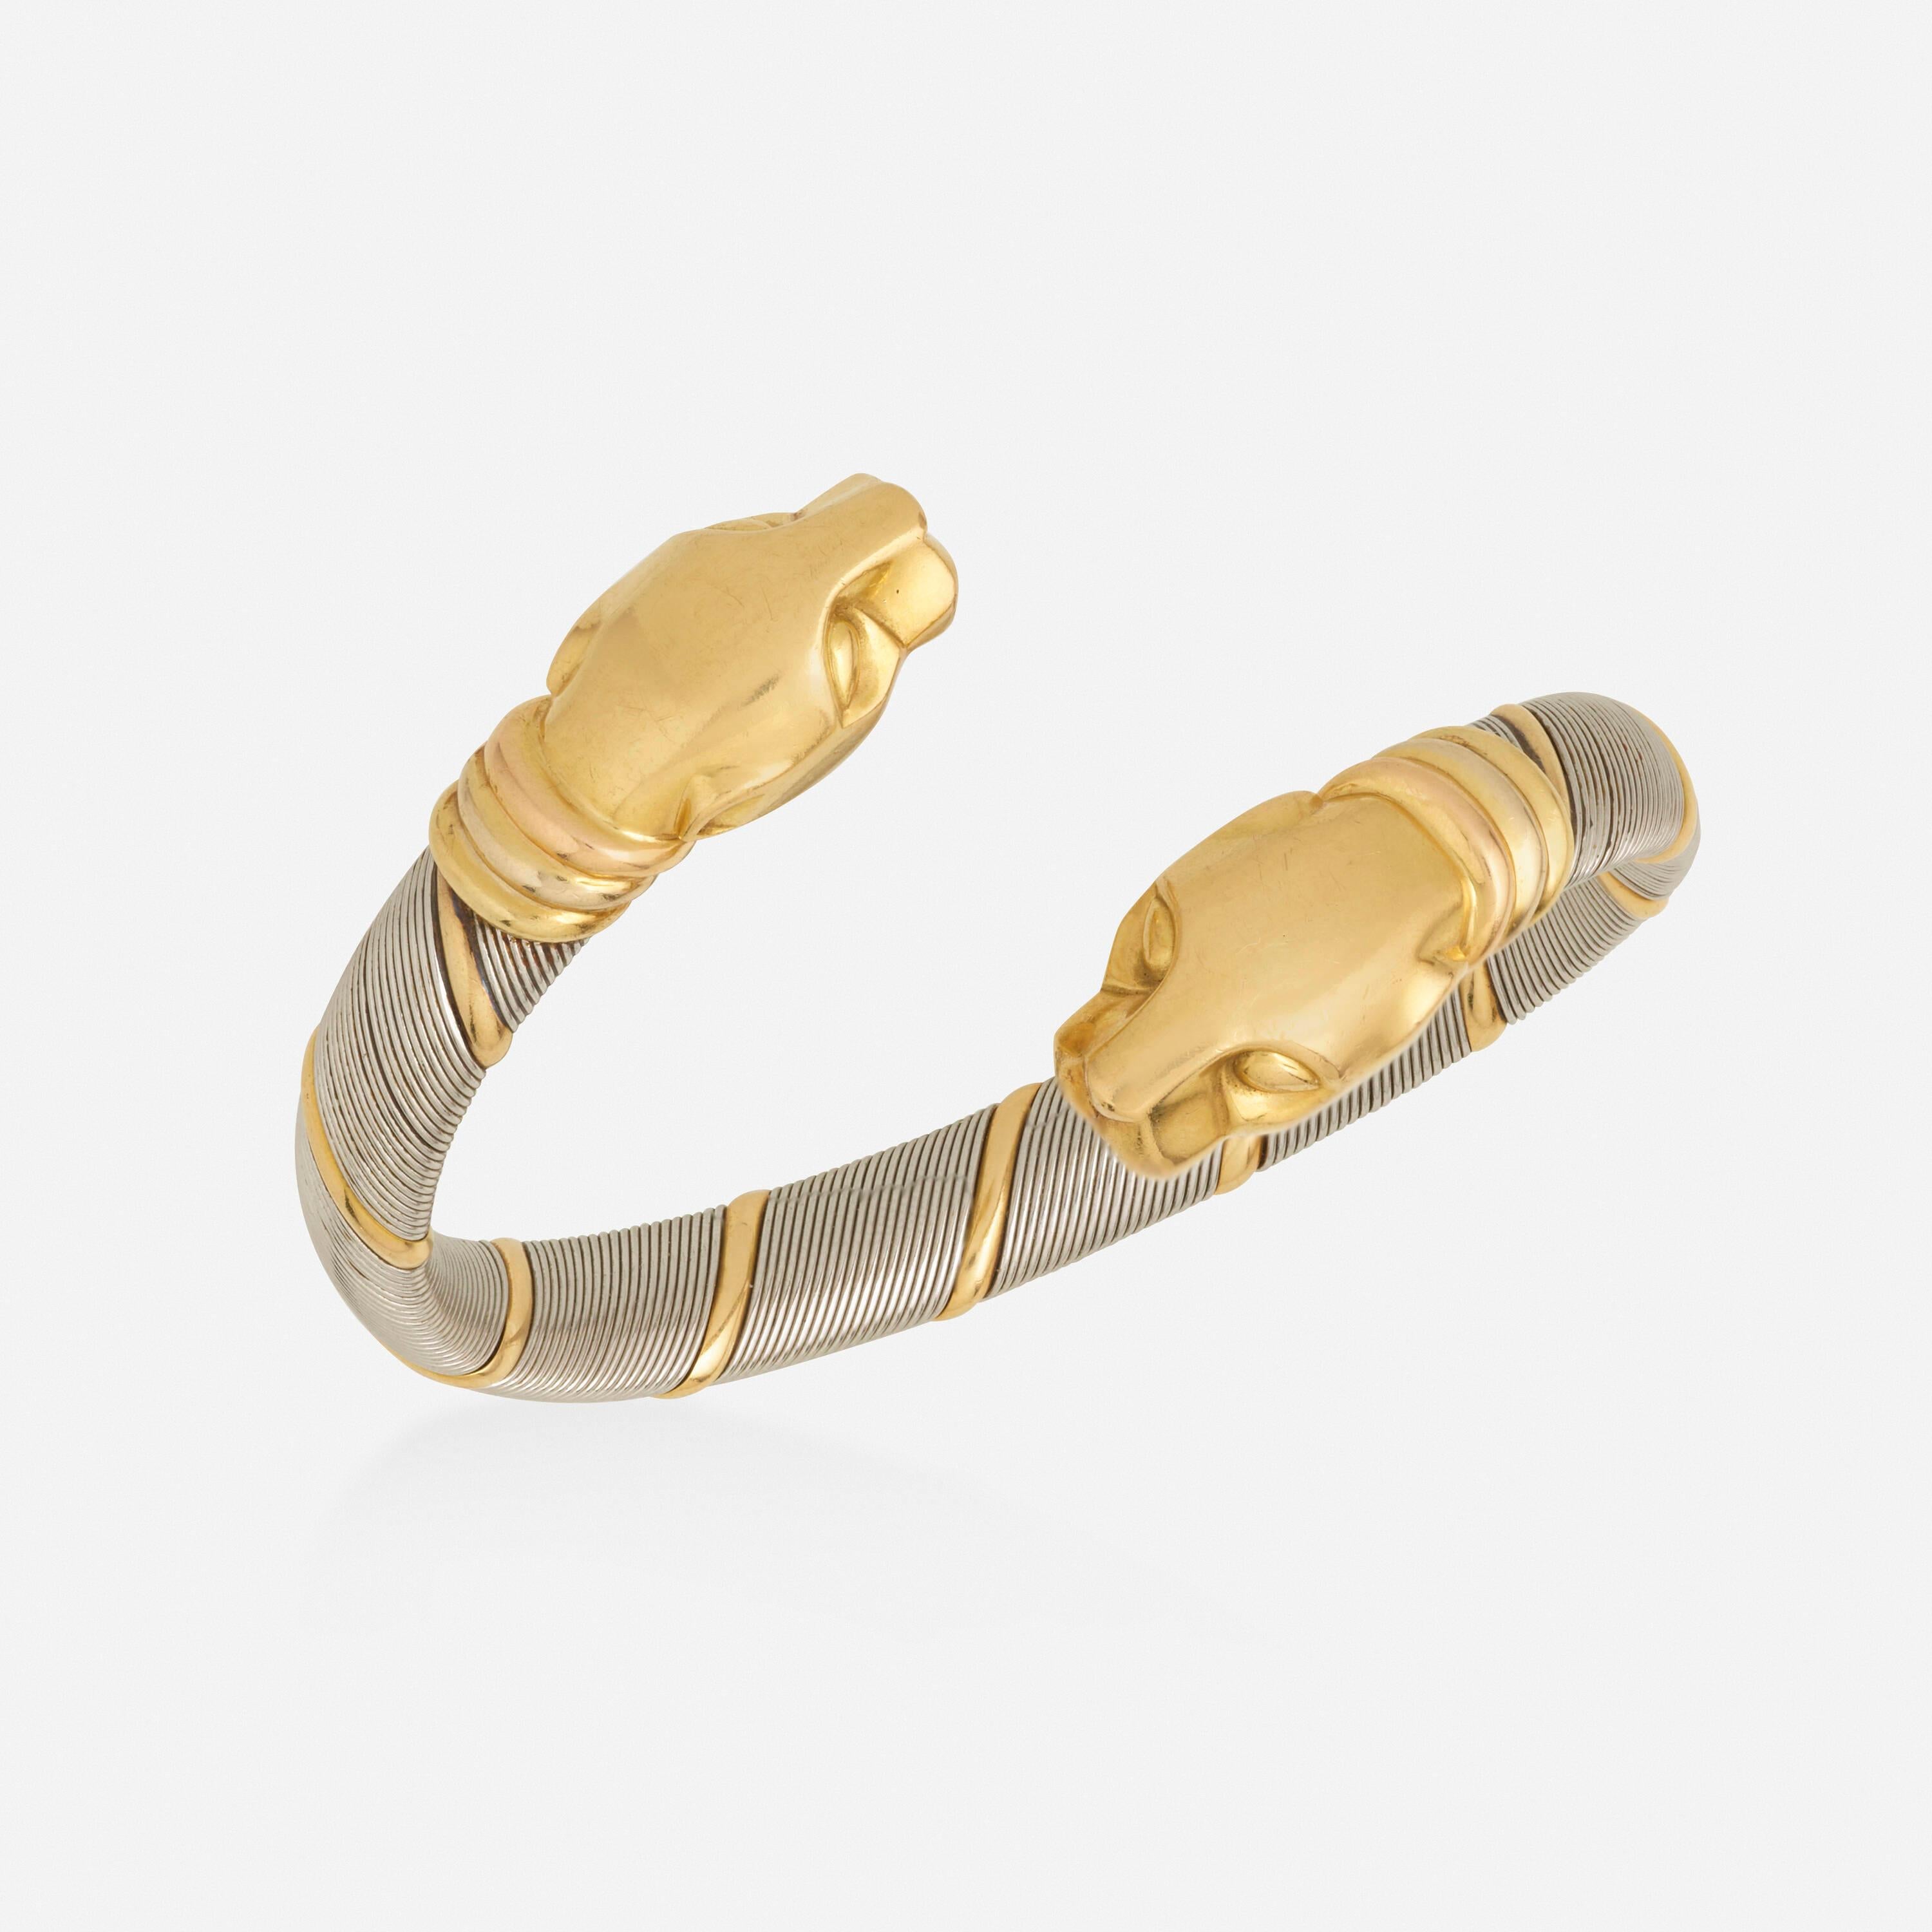 Made of steel and bars of gold, ending with two gold panther heads; 1980s
Steel and 18k yellow, white, and pink gold
Signed Cartier, numbered
Circumference 6.50 in